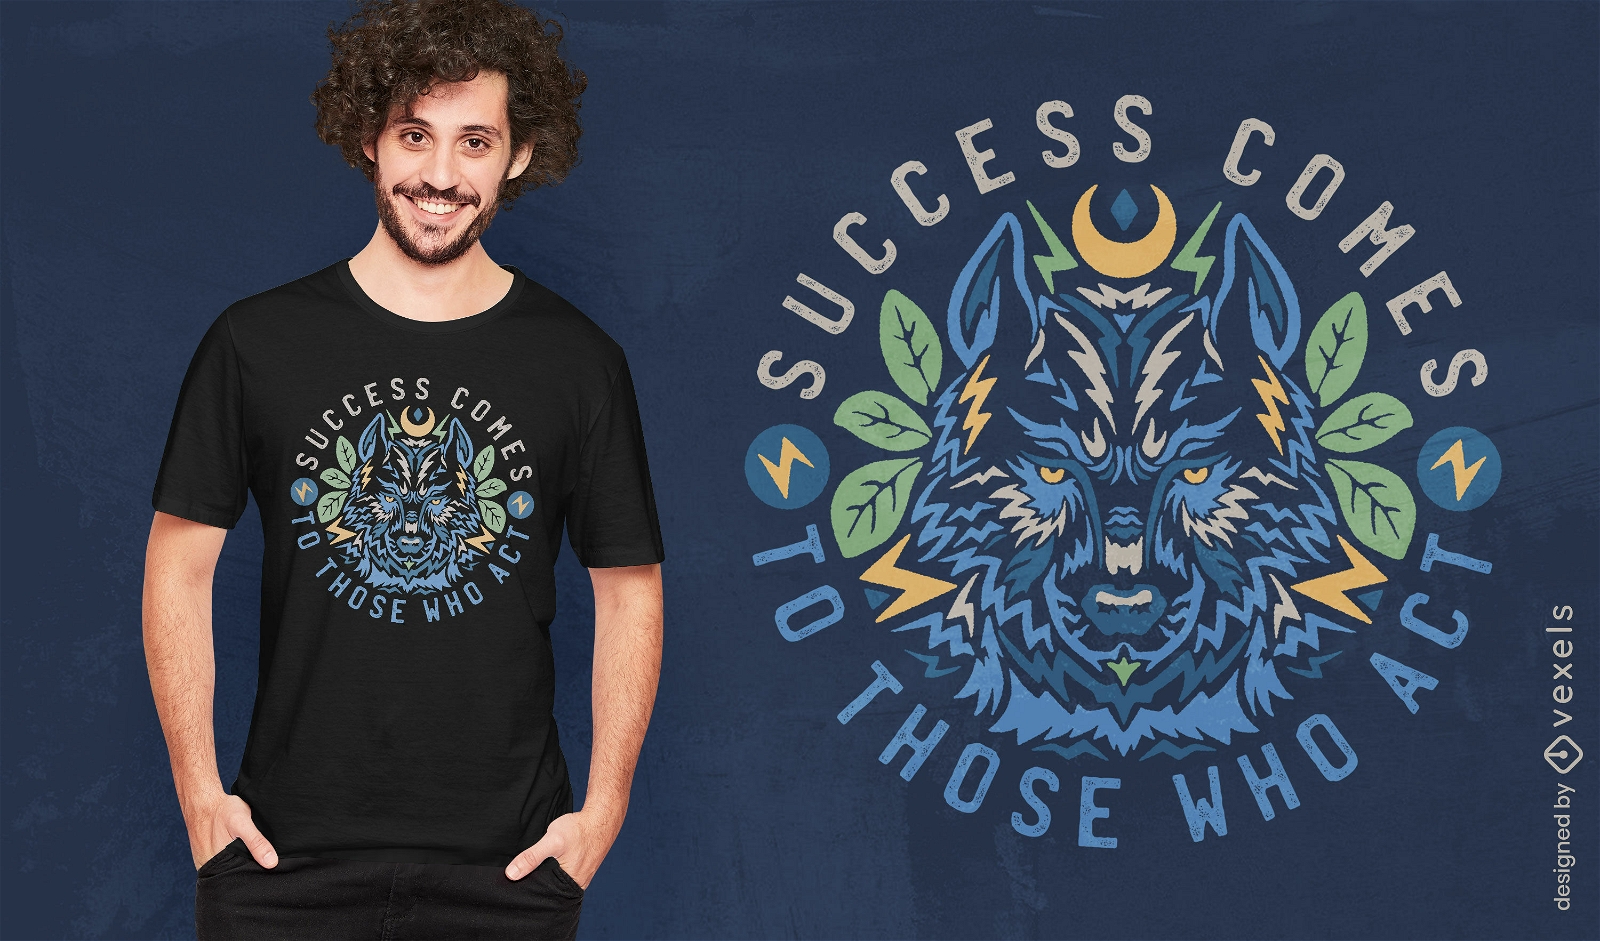 Success and action wolf t-shirt design